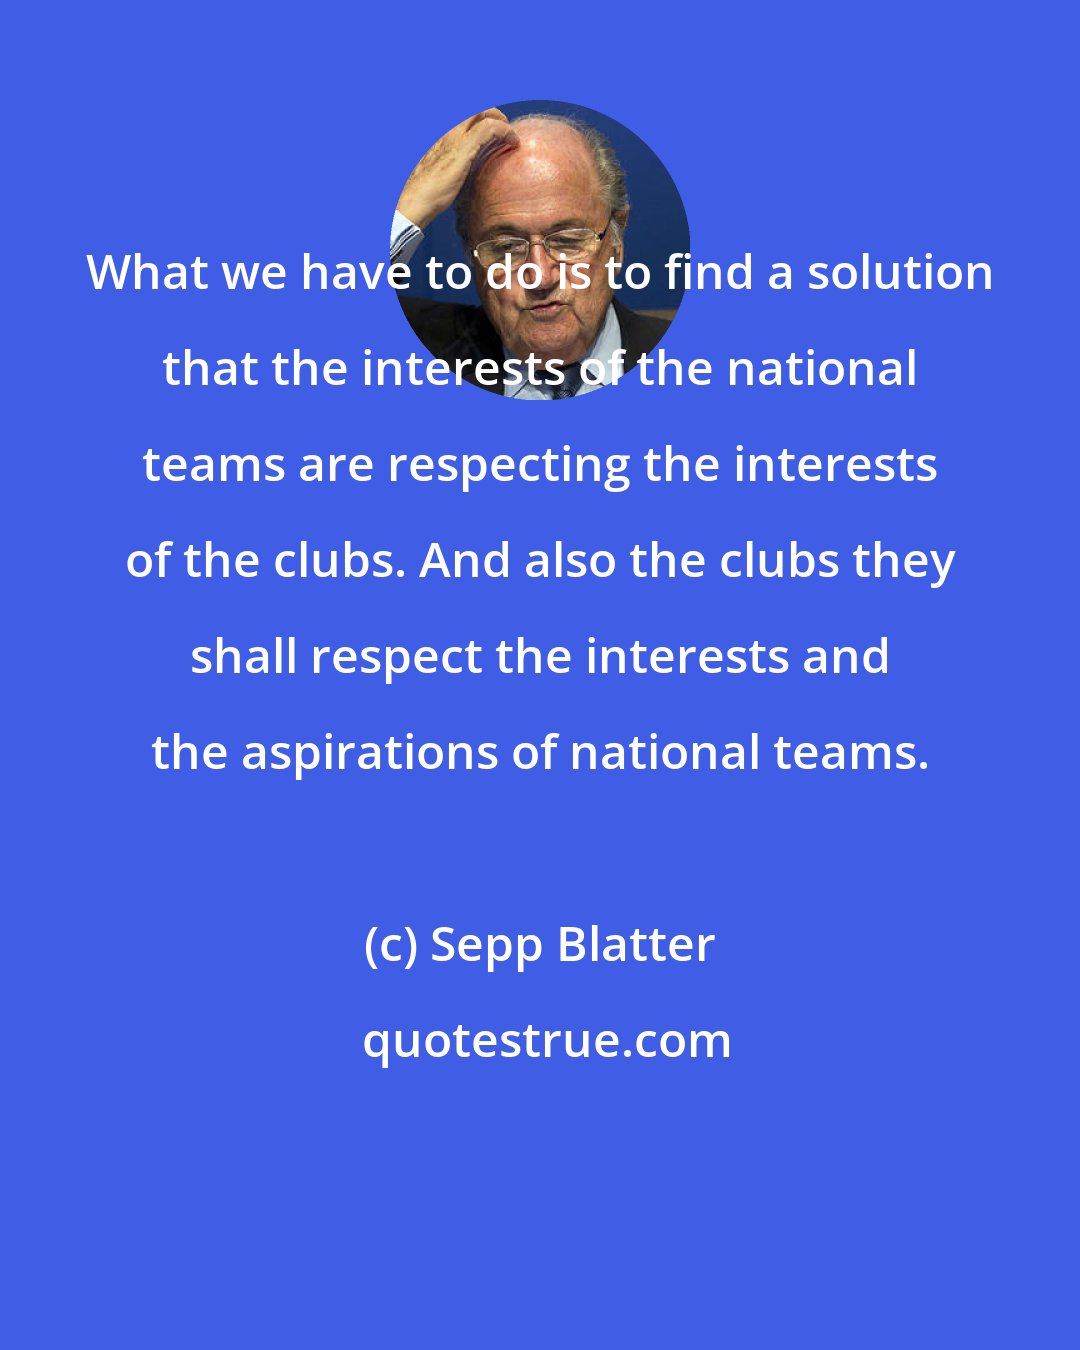 Sepp Blatter: What we have to do is to find a solution that the interests of the national teams are respecting the interests of the clubs. And also the clubs they shall respect the interests and the aspirations of national teams.